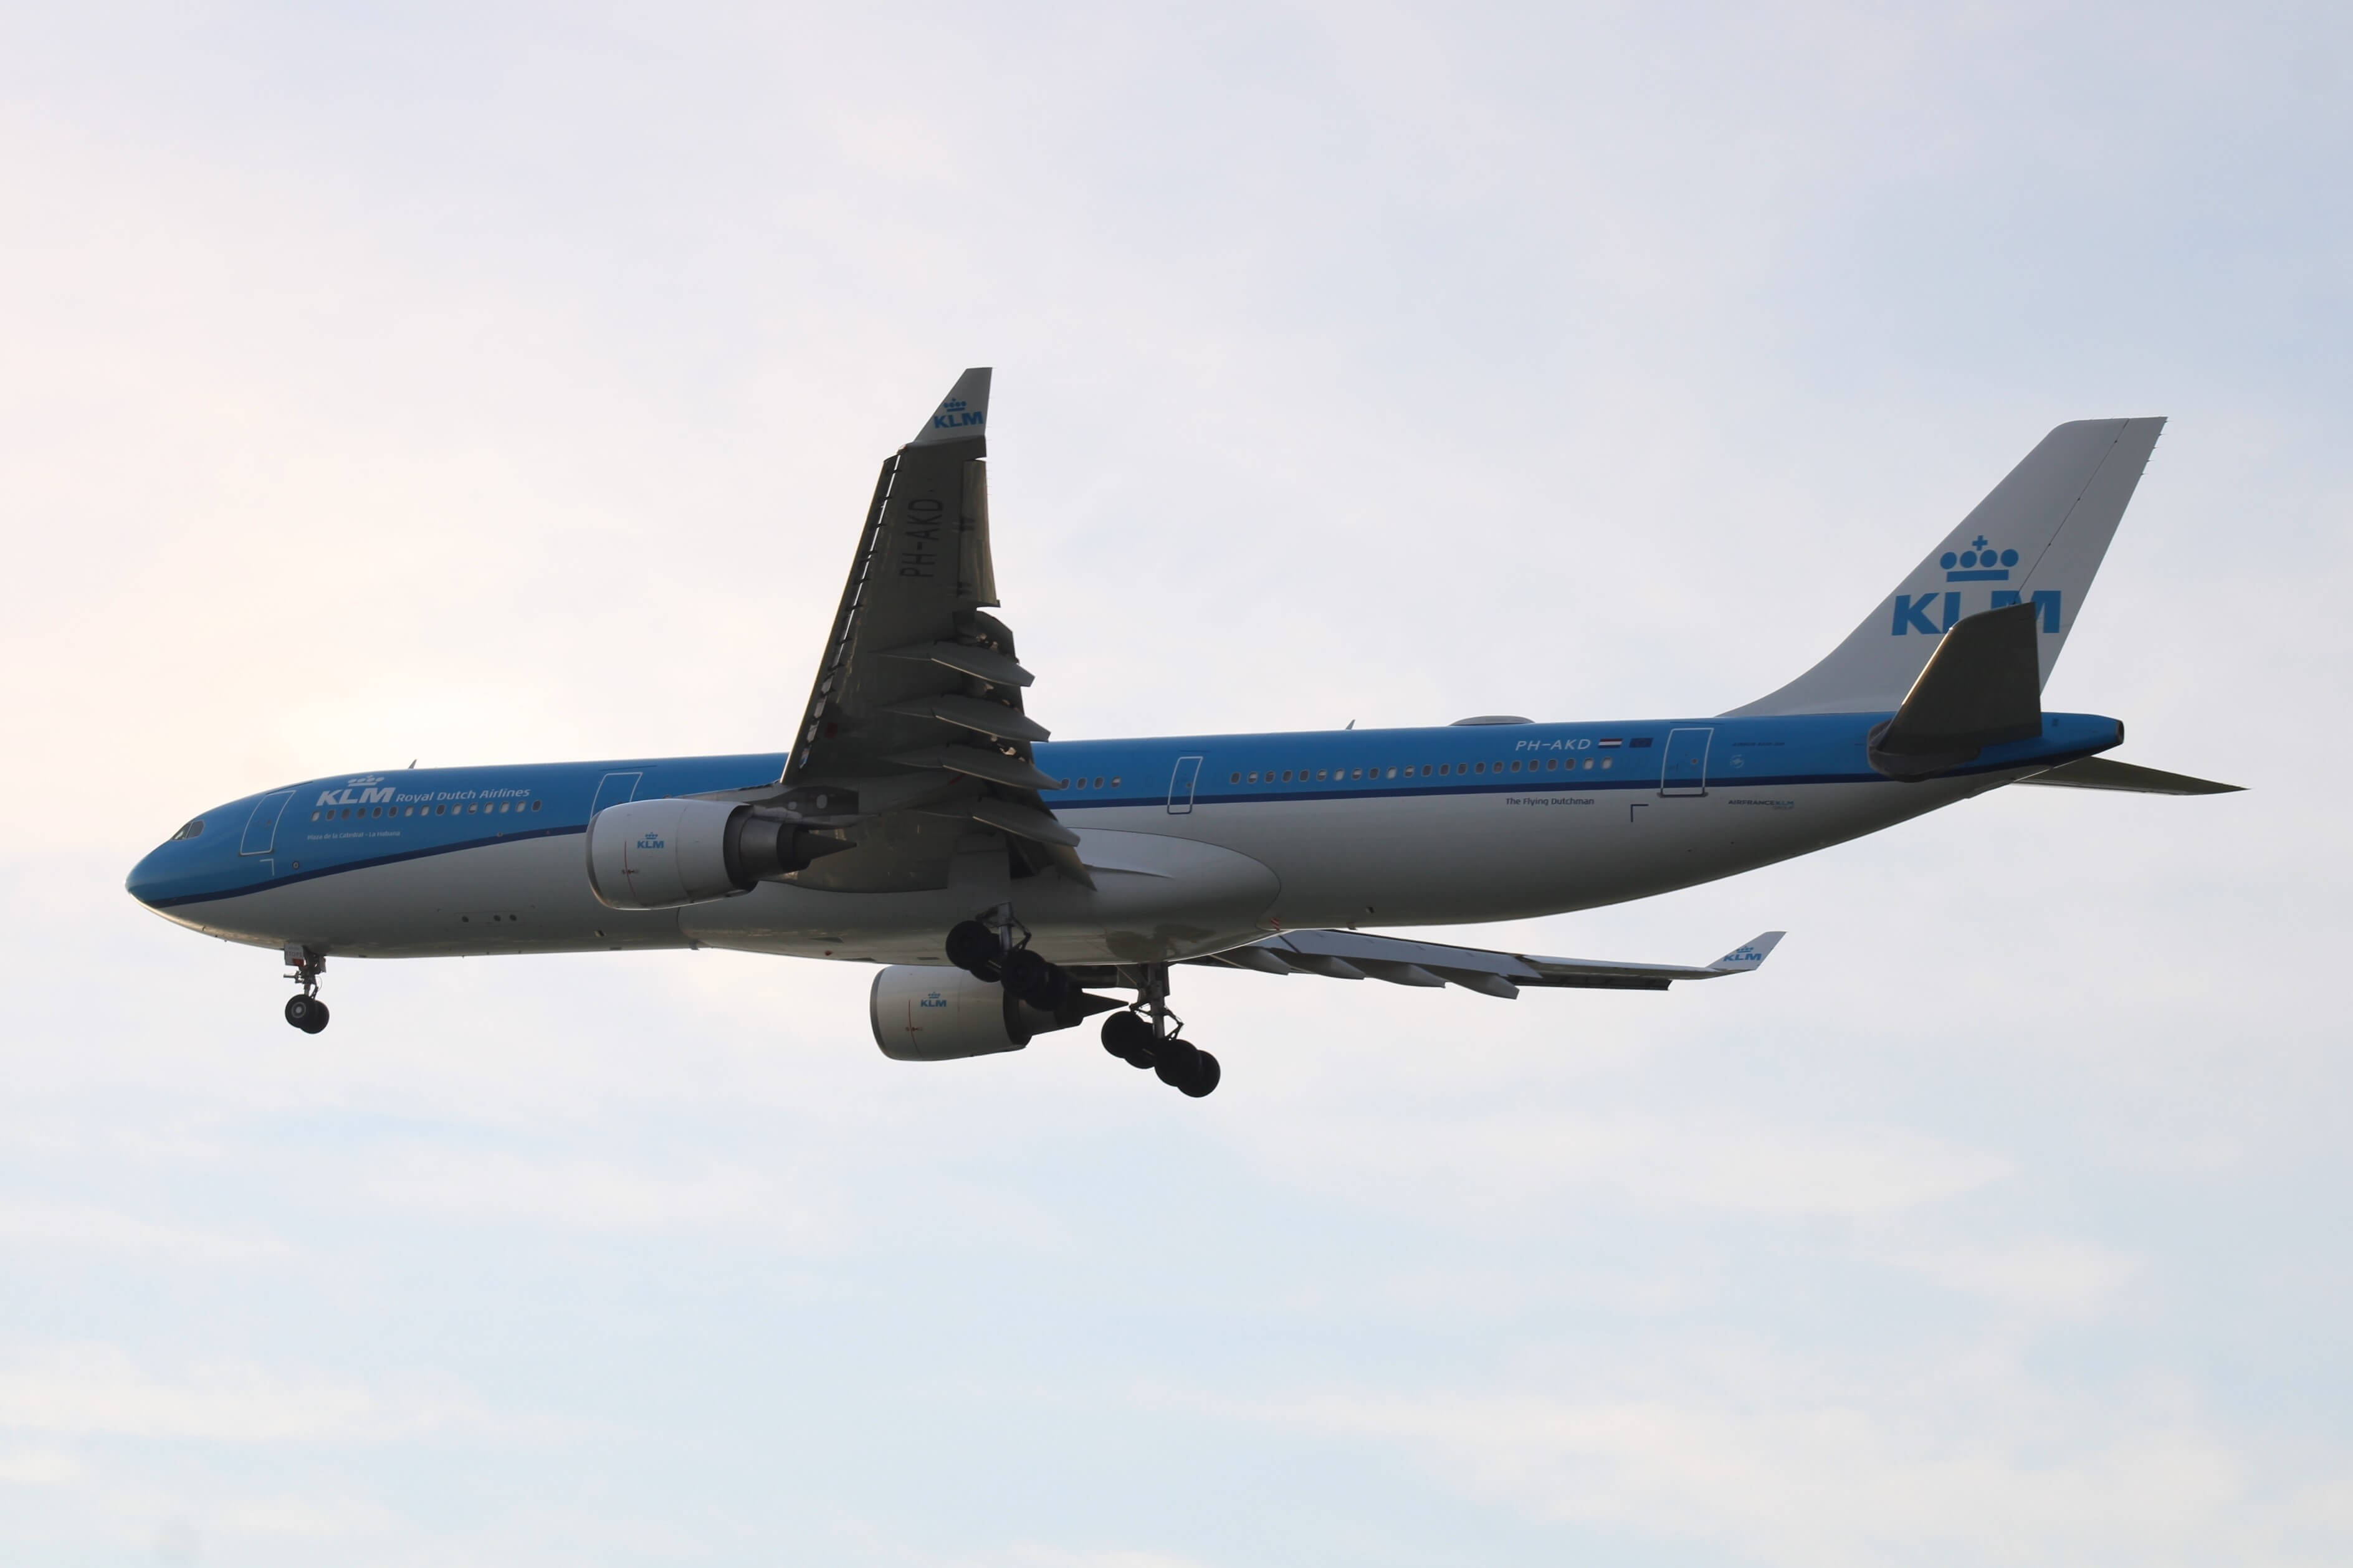 KLM Airbus A330-300 airplane at Boston Logan Airport (BOS) in the